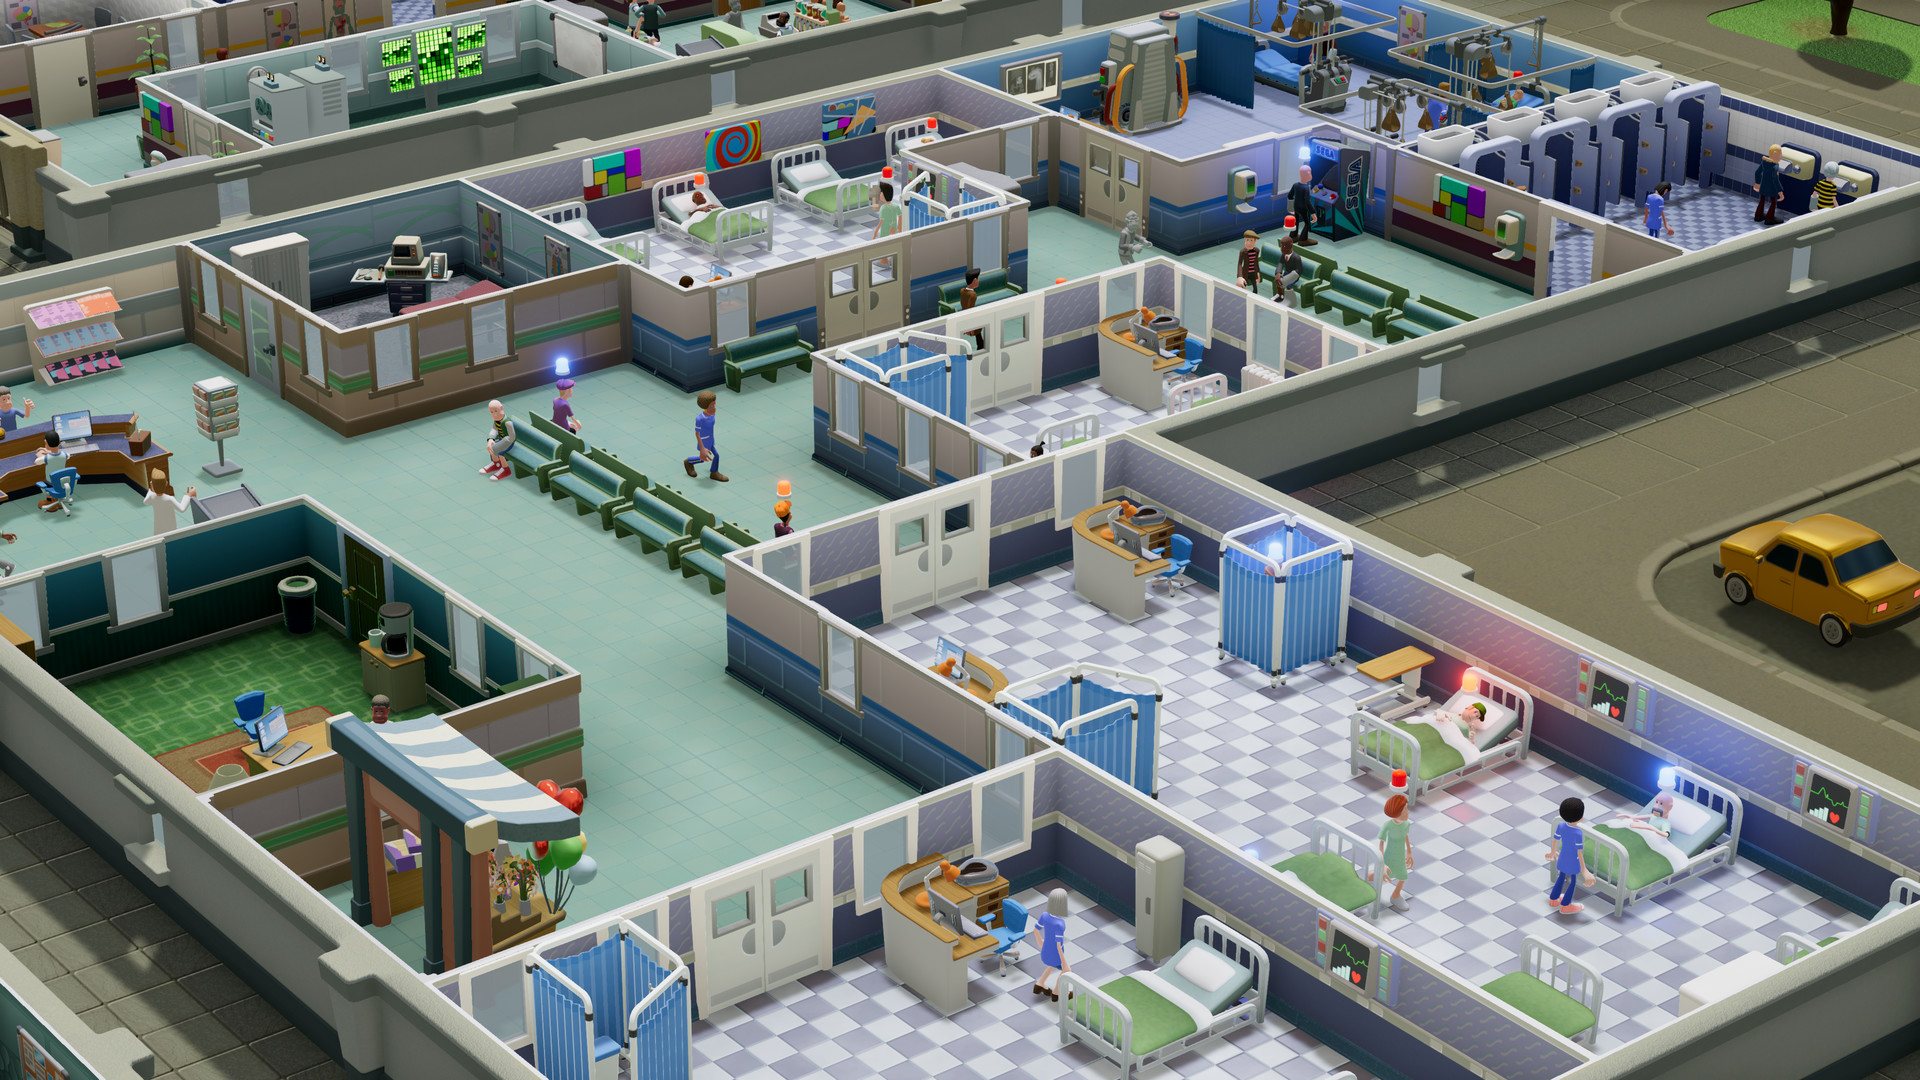 Two Point Hospital RoW Steam Altergift